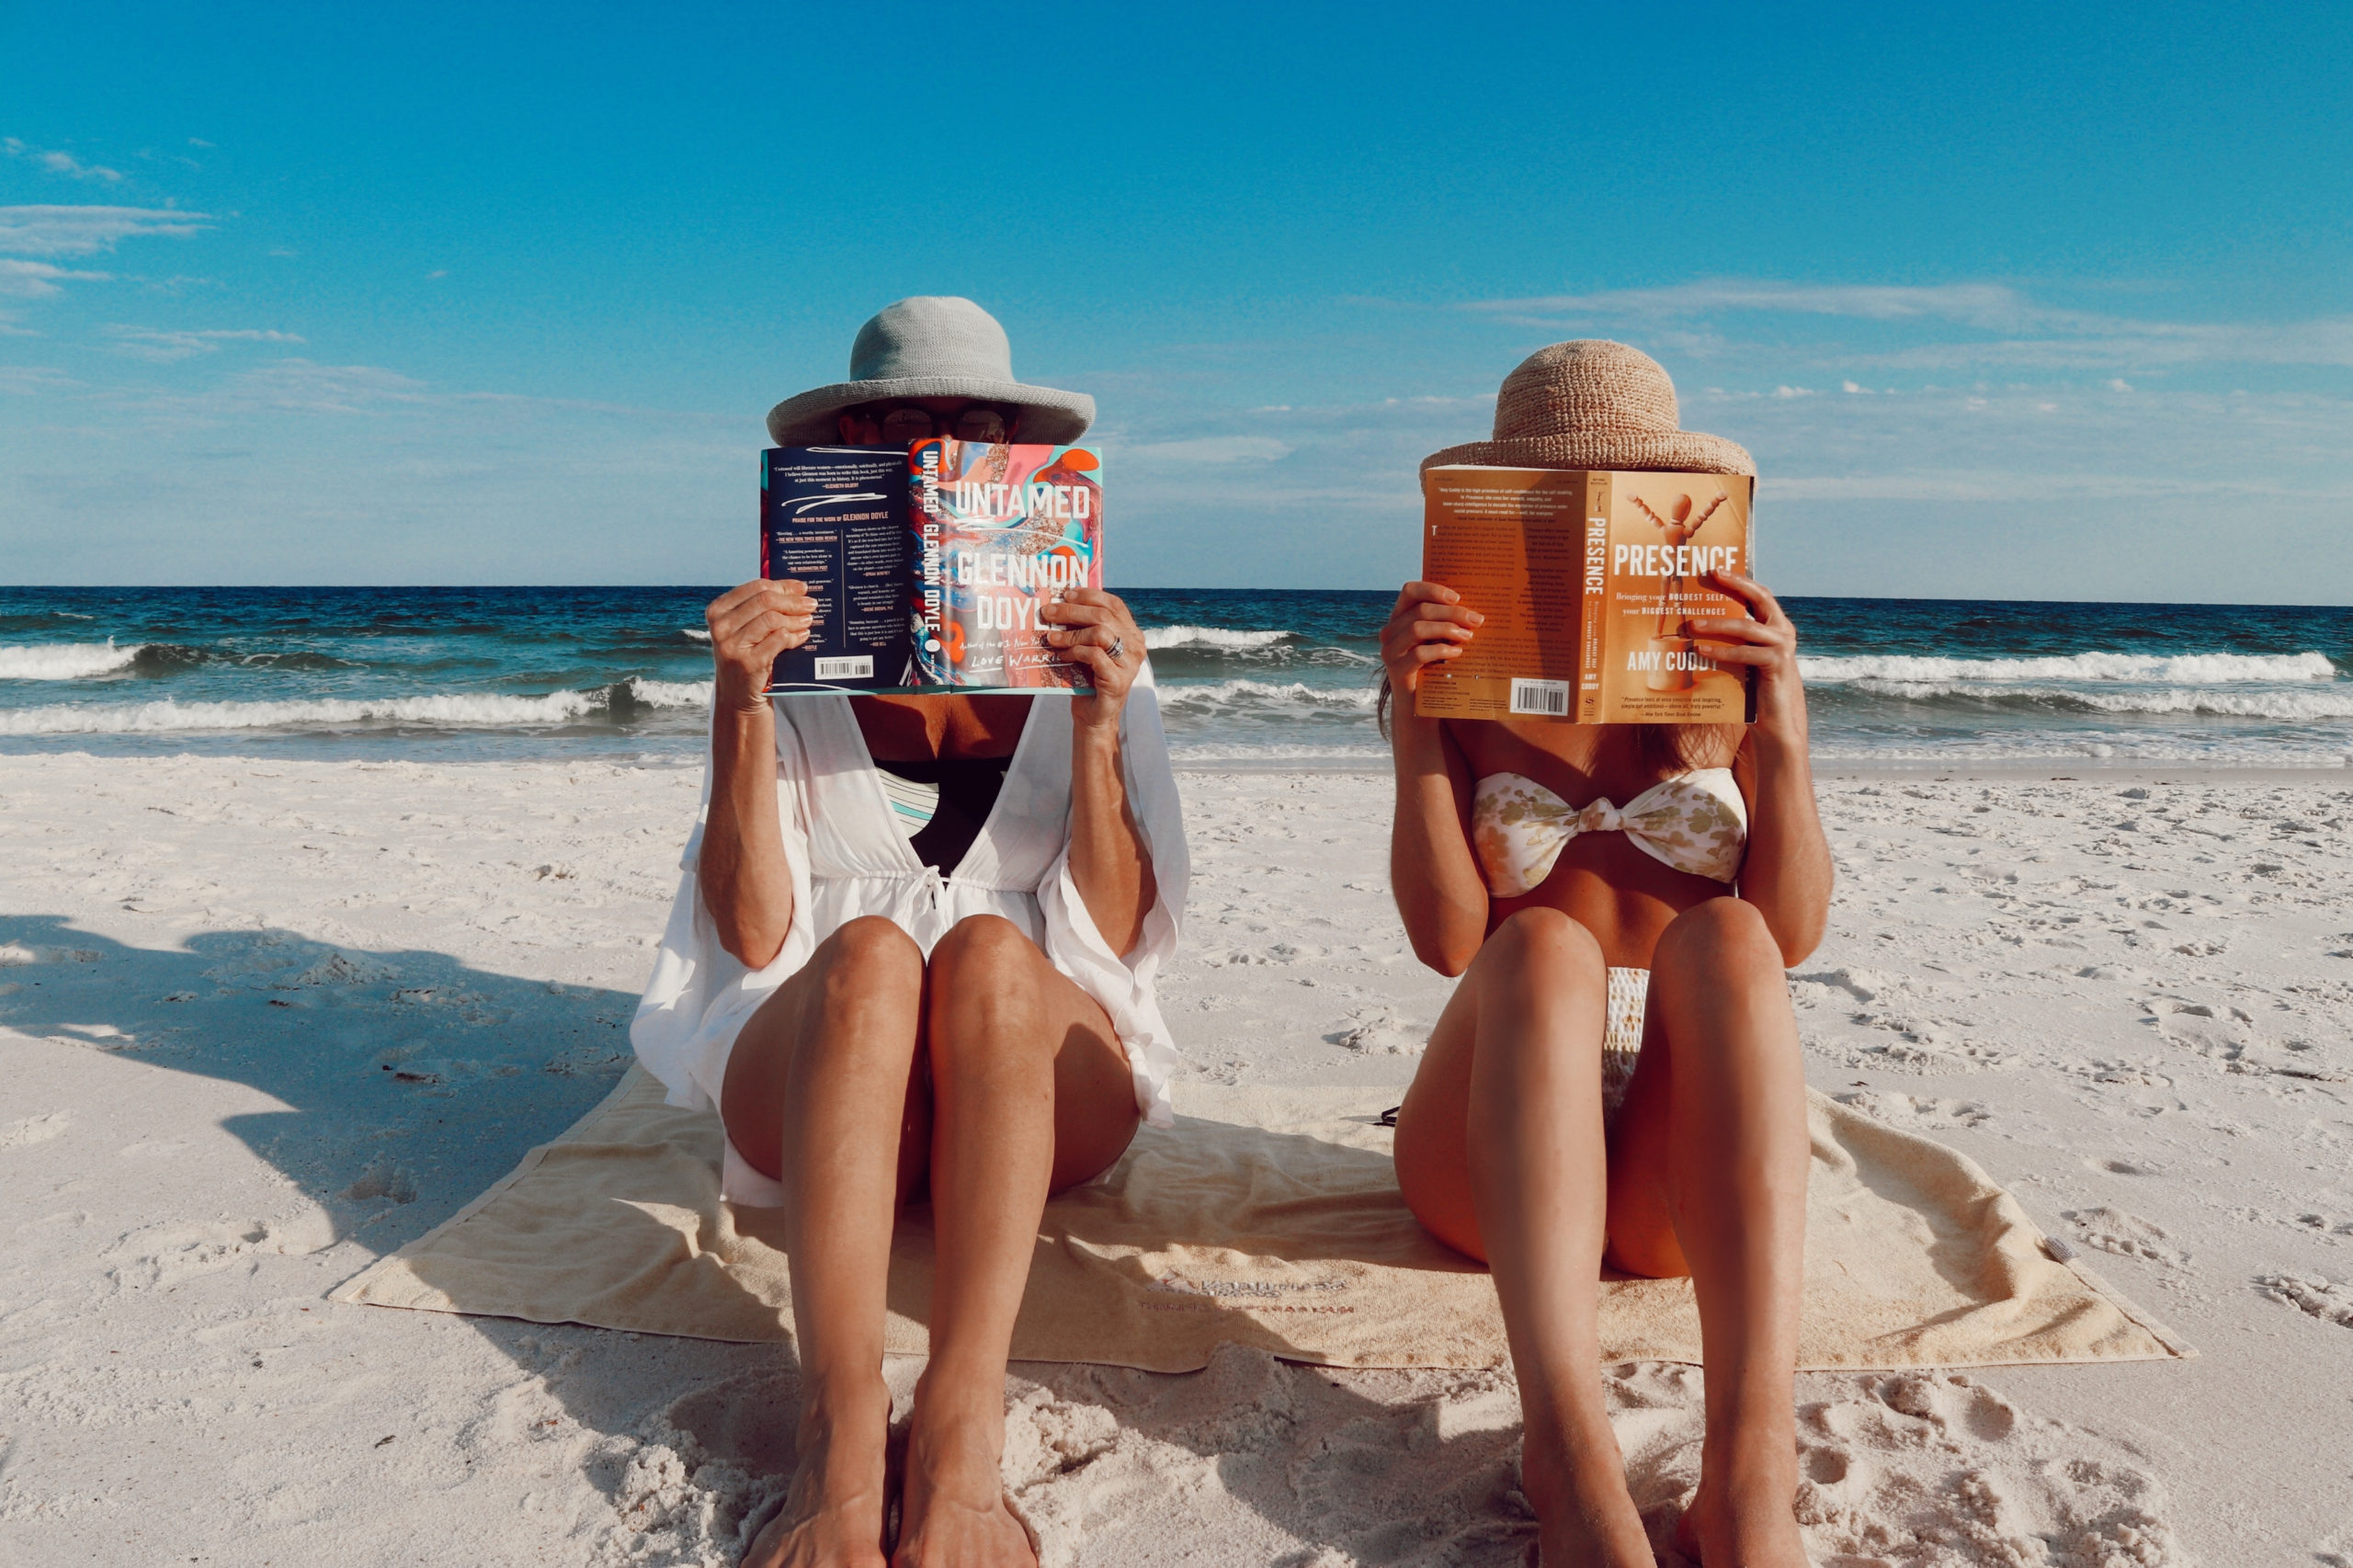 Two women sitting on the beach wearing bathing suits and sun hats holding up books